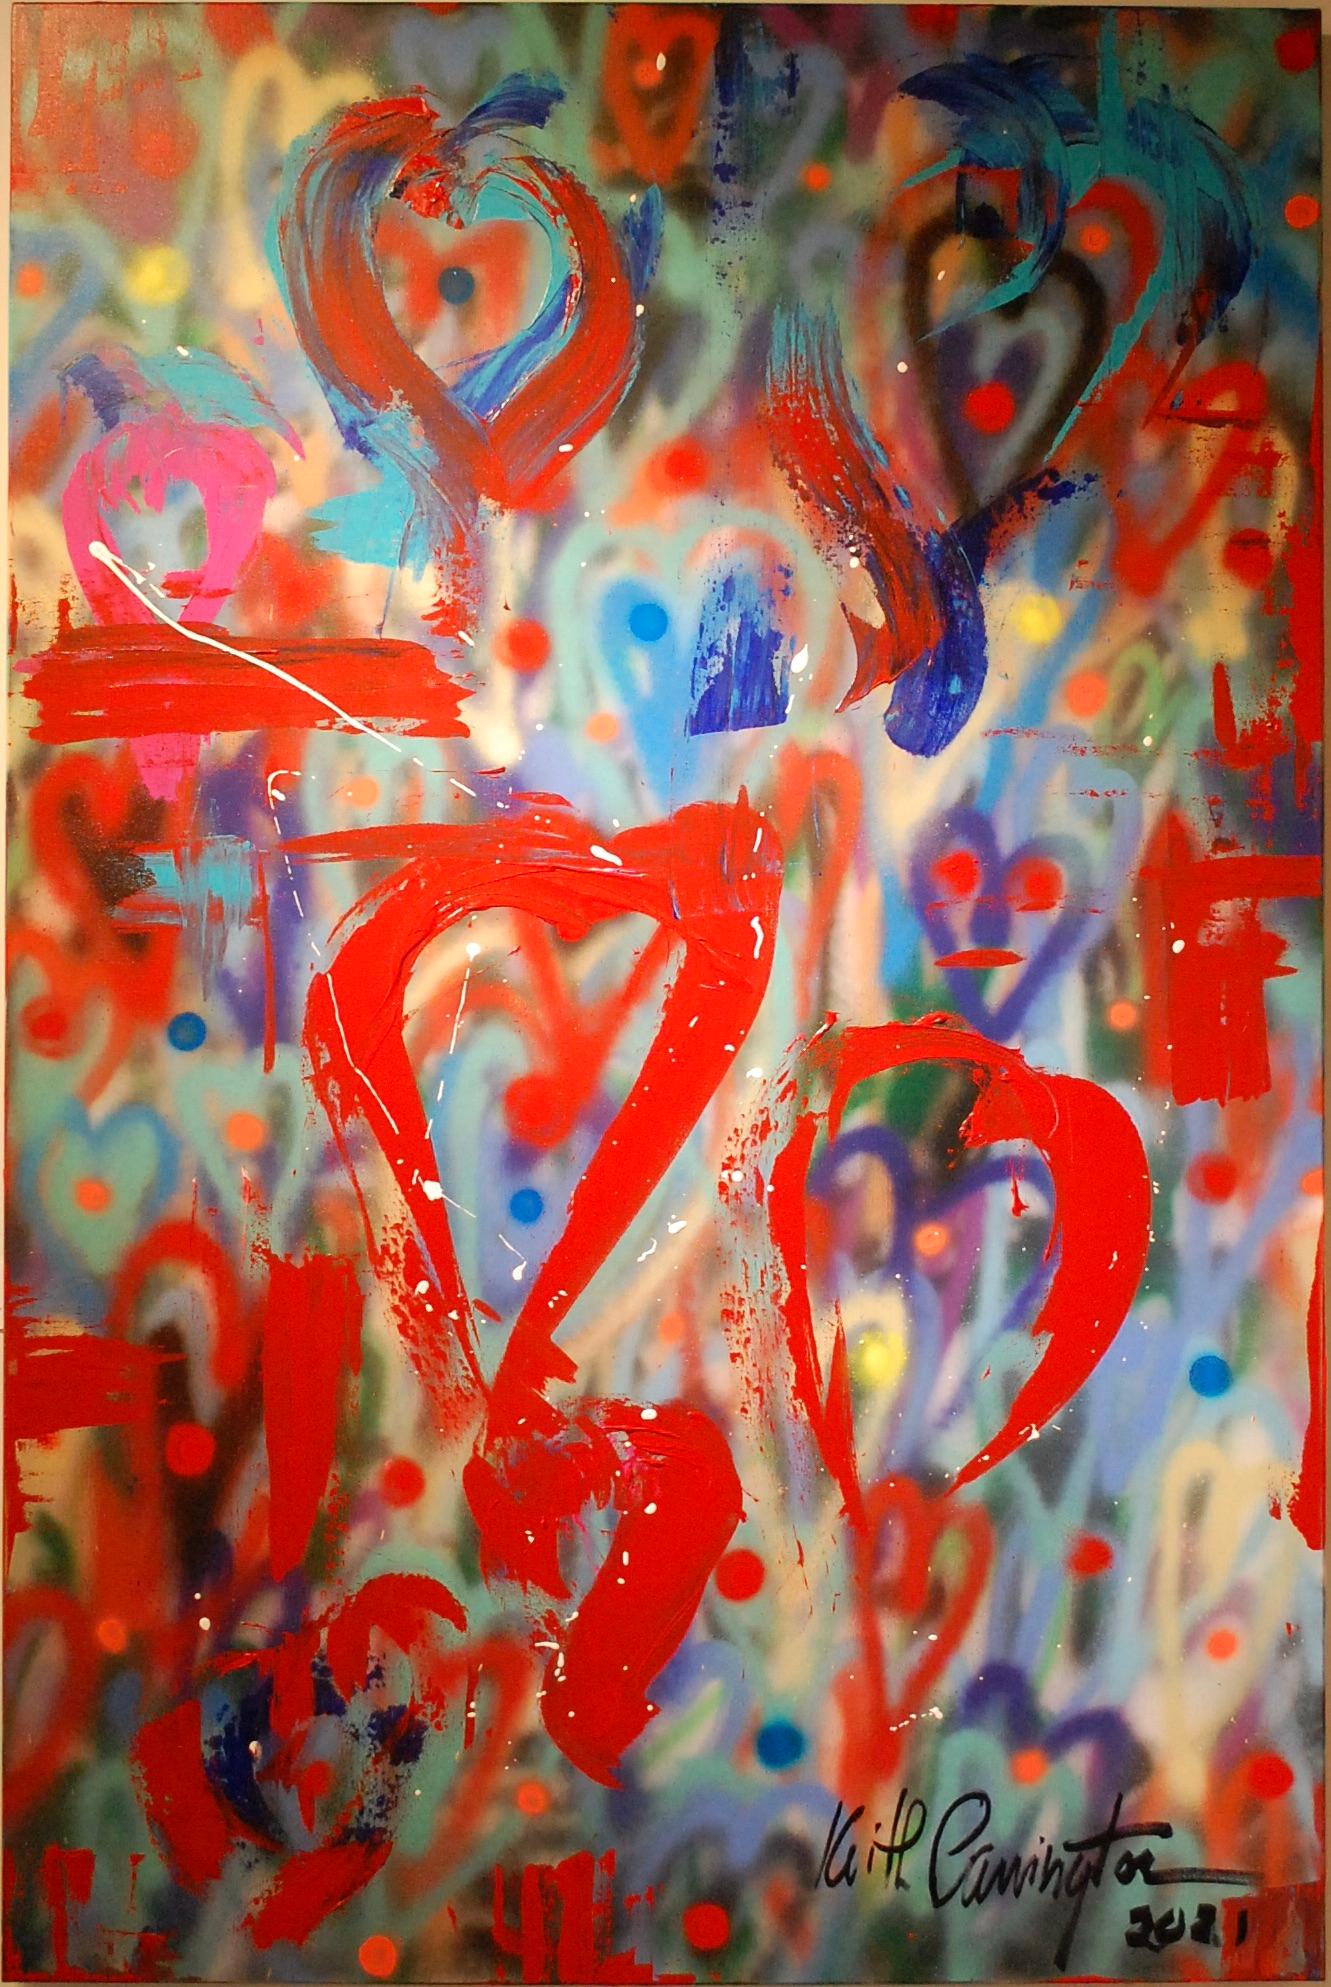 L'amour I (Grau), Abstract Painting, von Keith Carrington